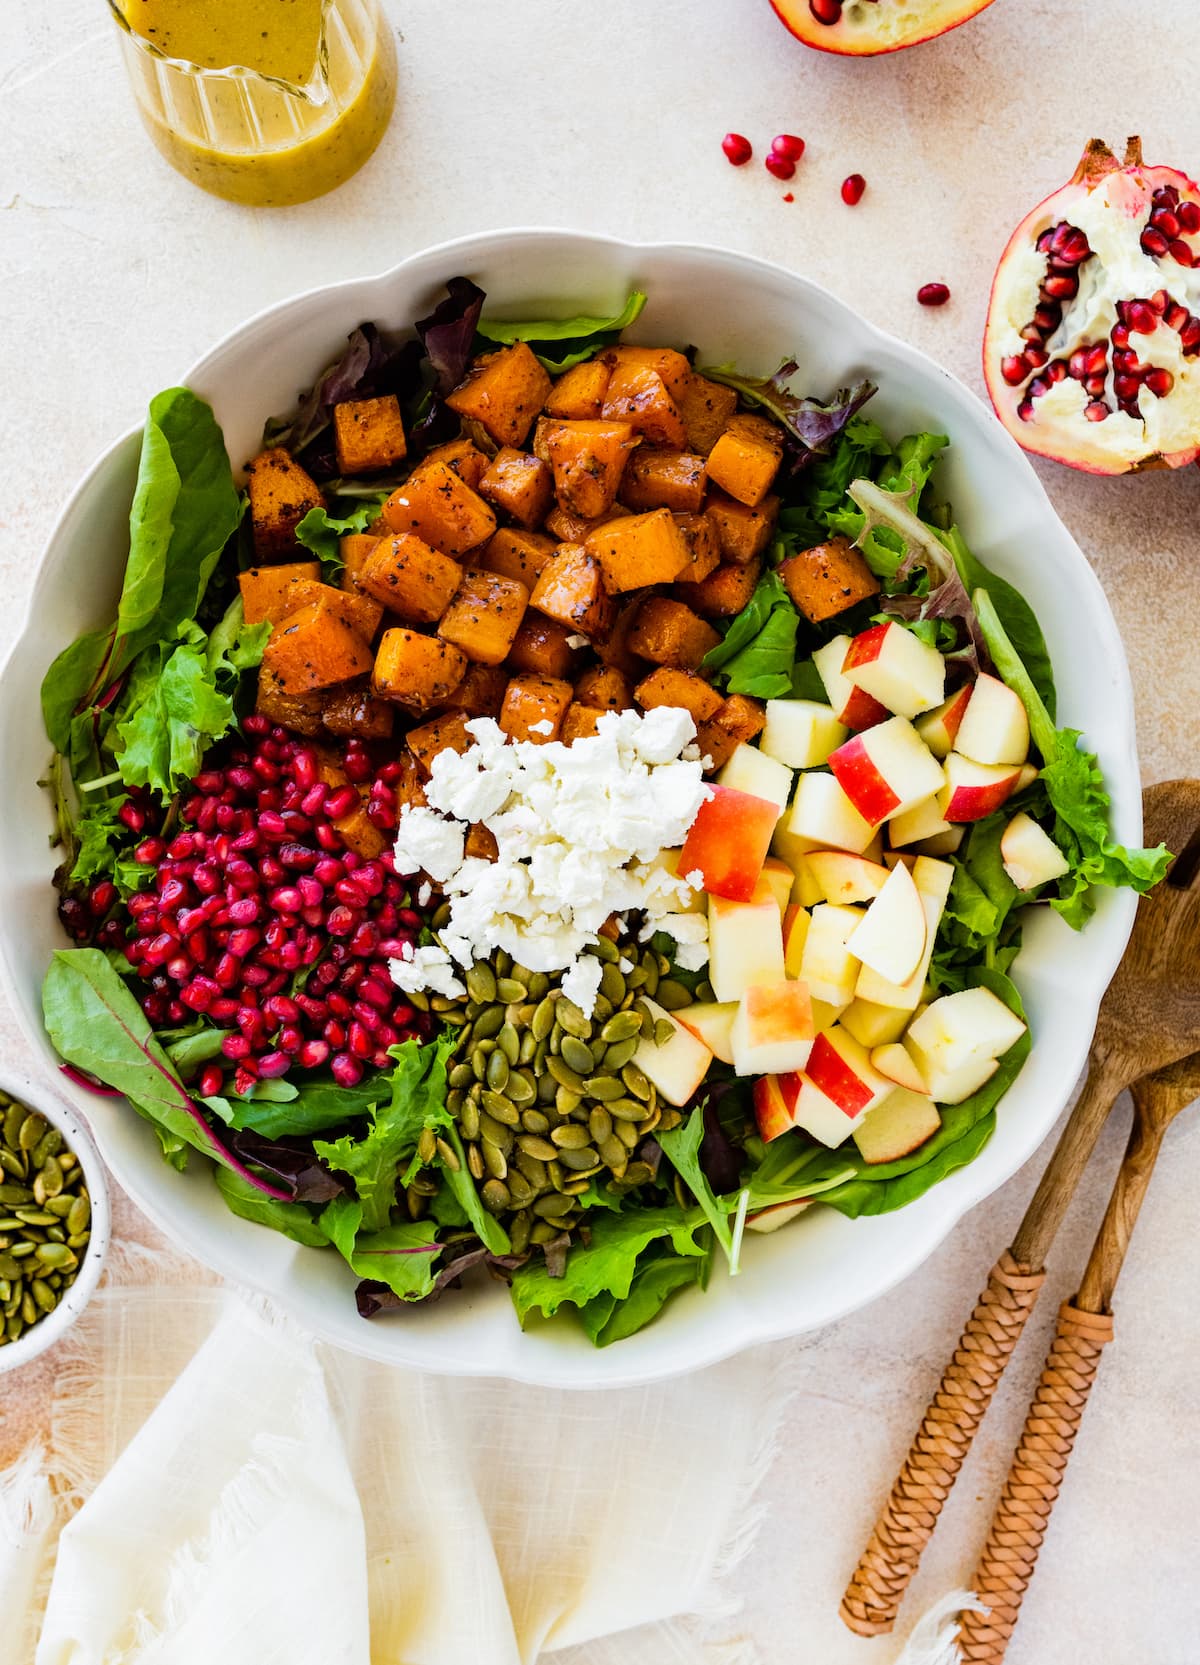 Thanksgiving salad in a large bowl with the ingredients that include butternut squash, apple, goat cheese, pomegranate, pumpkin seeds, and greens.